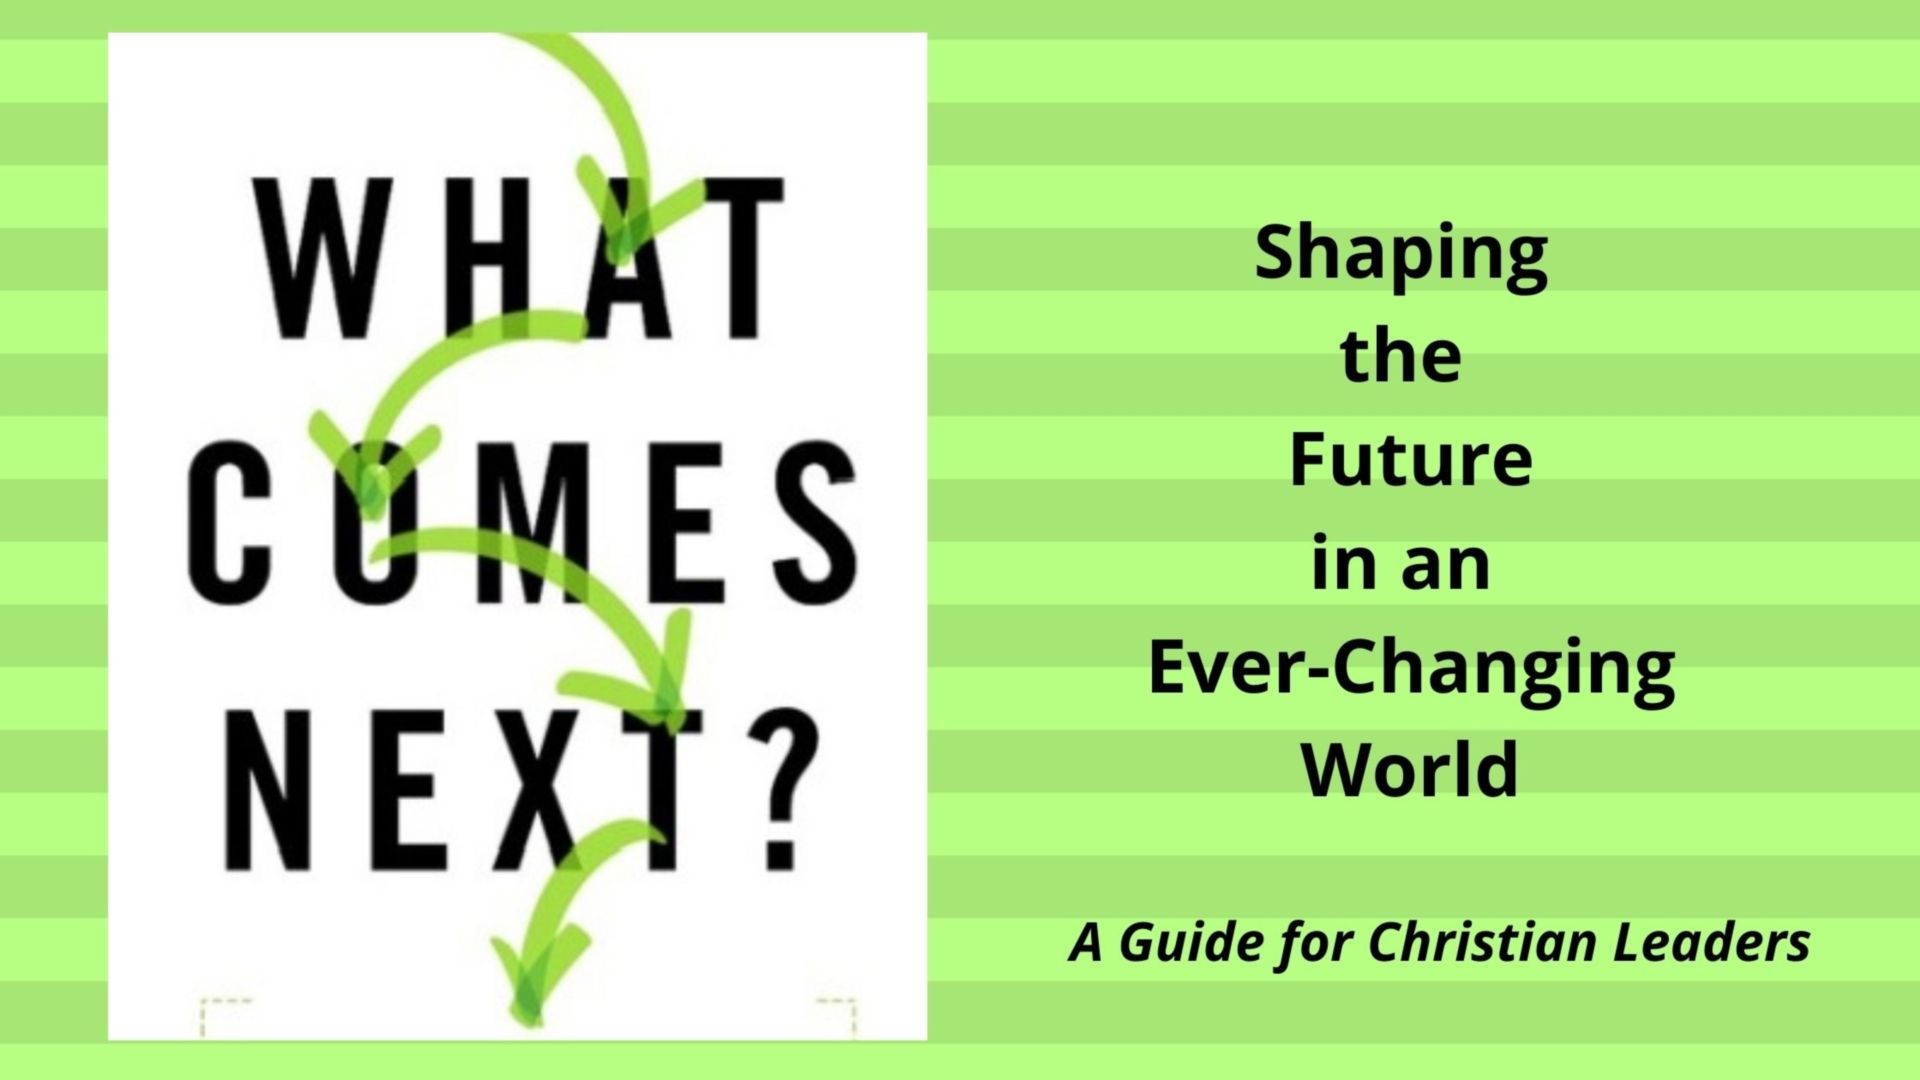 A review on the book 'What Comes Next?' by Nicholas Skytland and Alicia Llewellyn